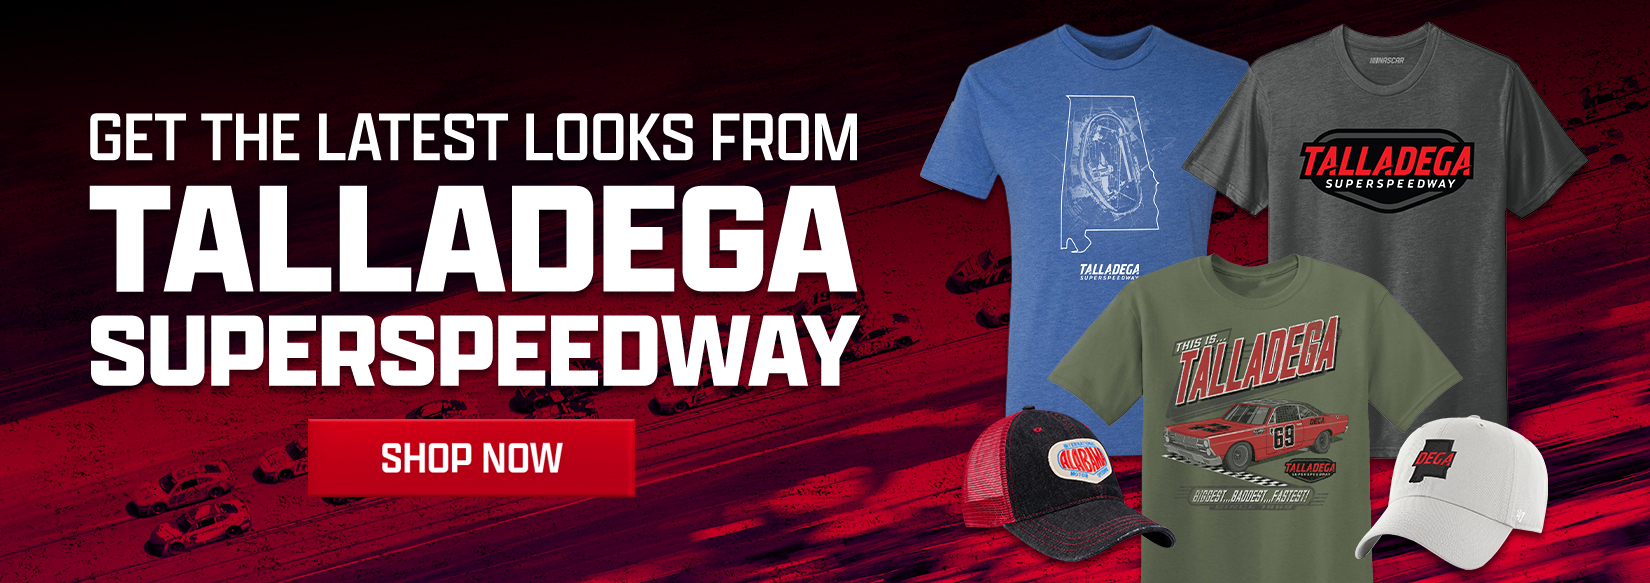 Get the Latest Looks from Talladega Superspeedway - SHOP NOW